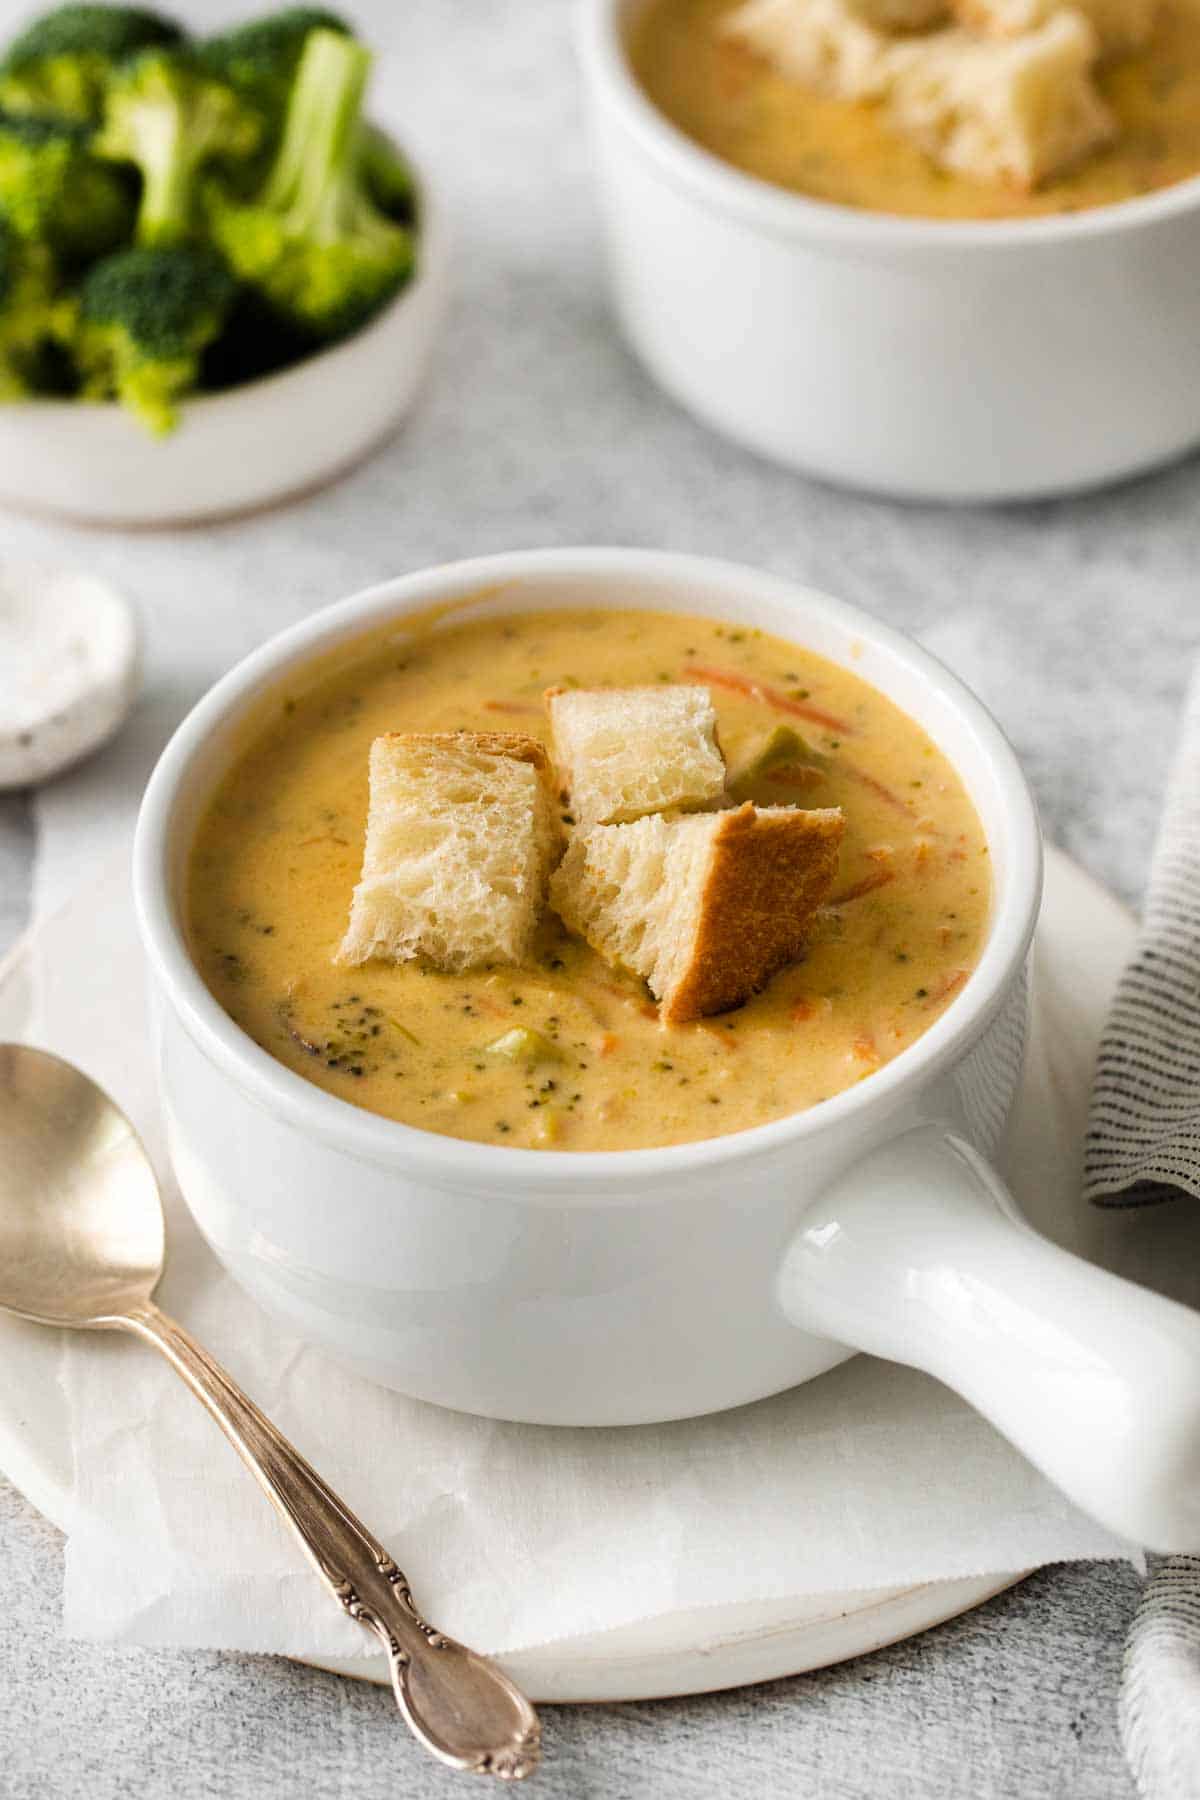 Stovetop Broccoli Cheddar Soup with Croutons